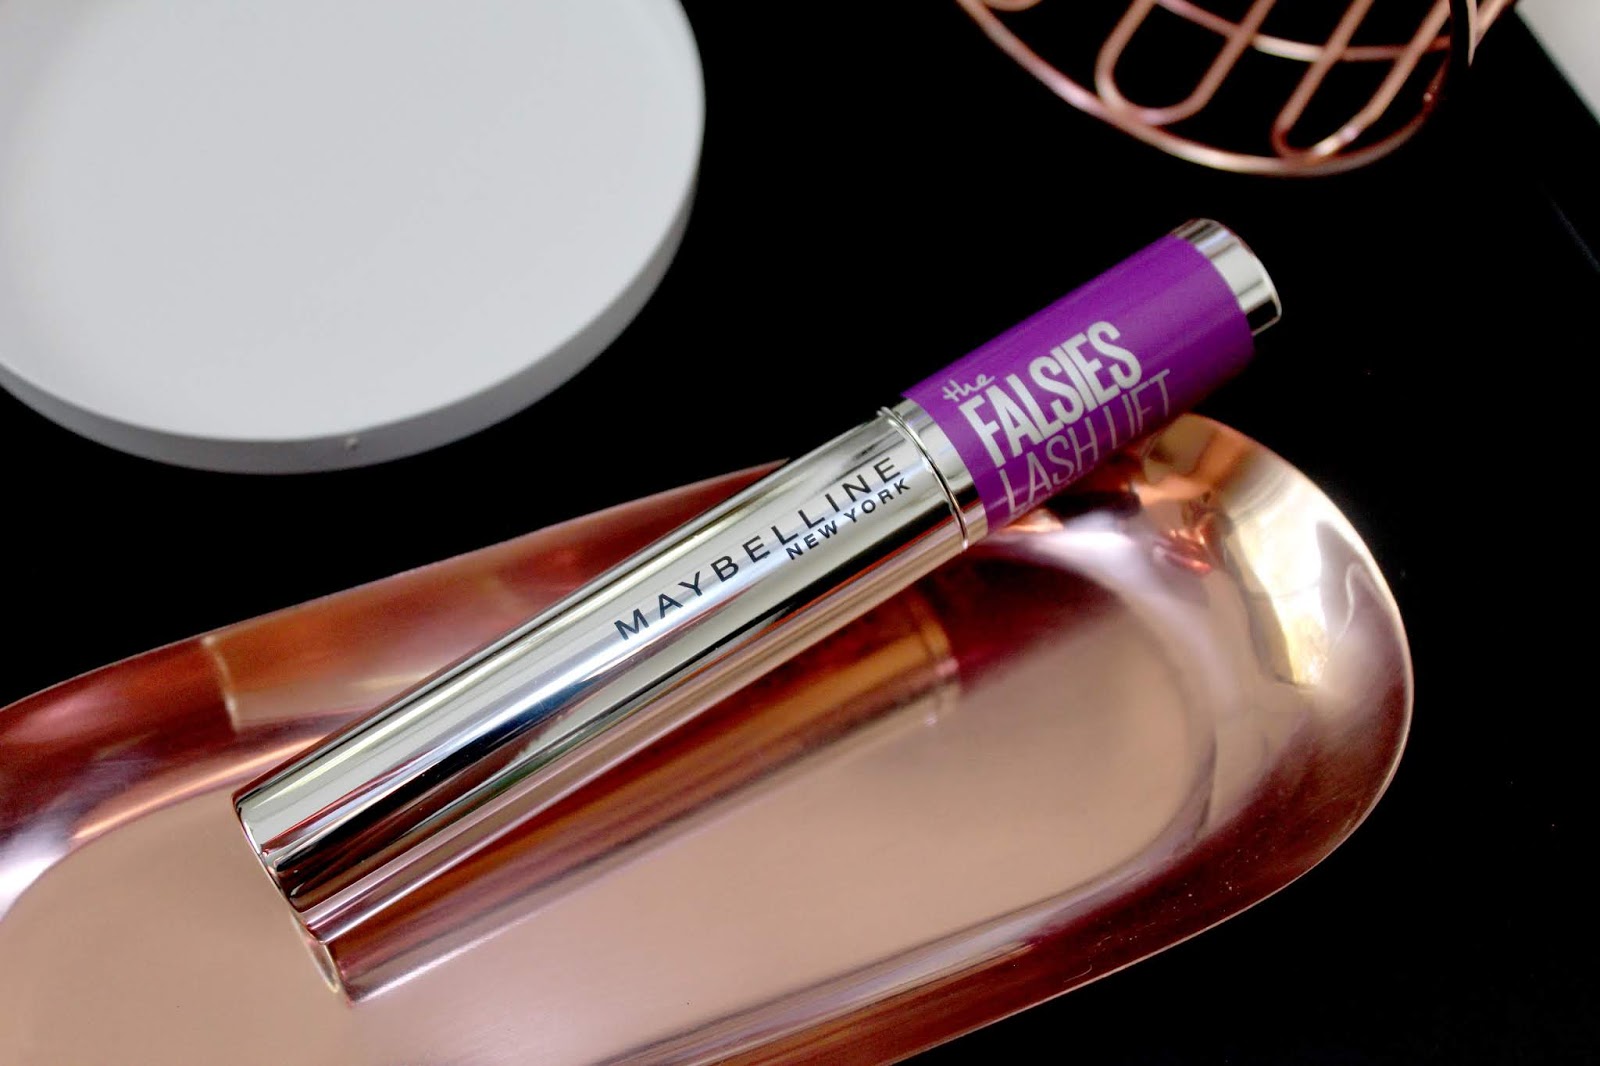 Lash Review: The Maybelline Falsies Lift